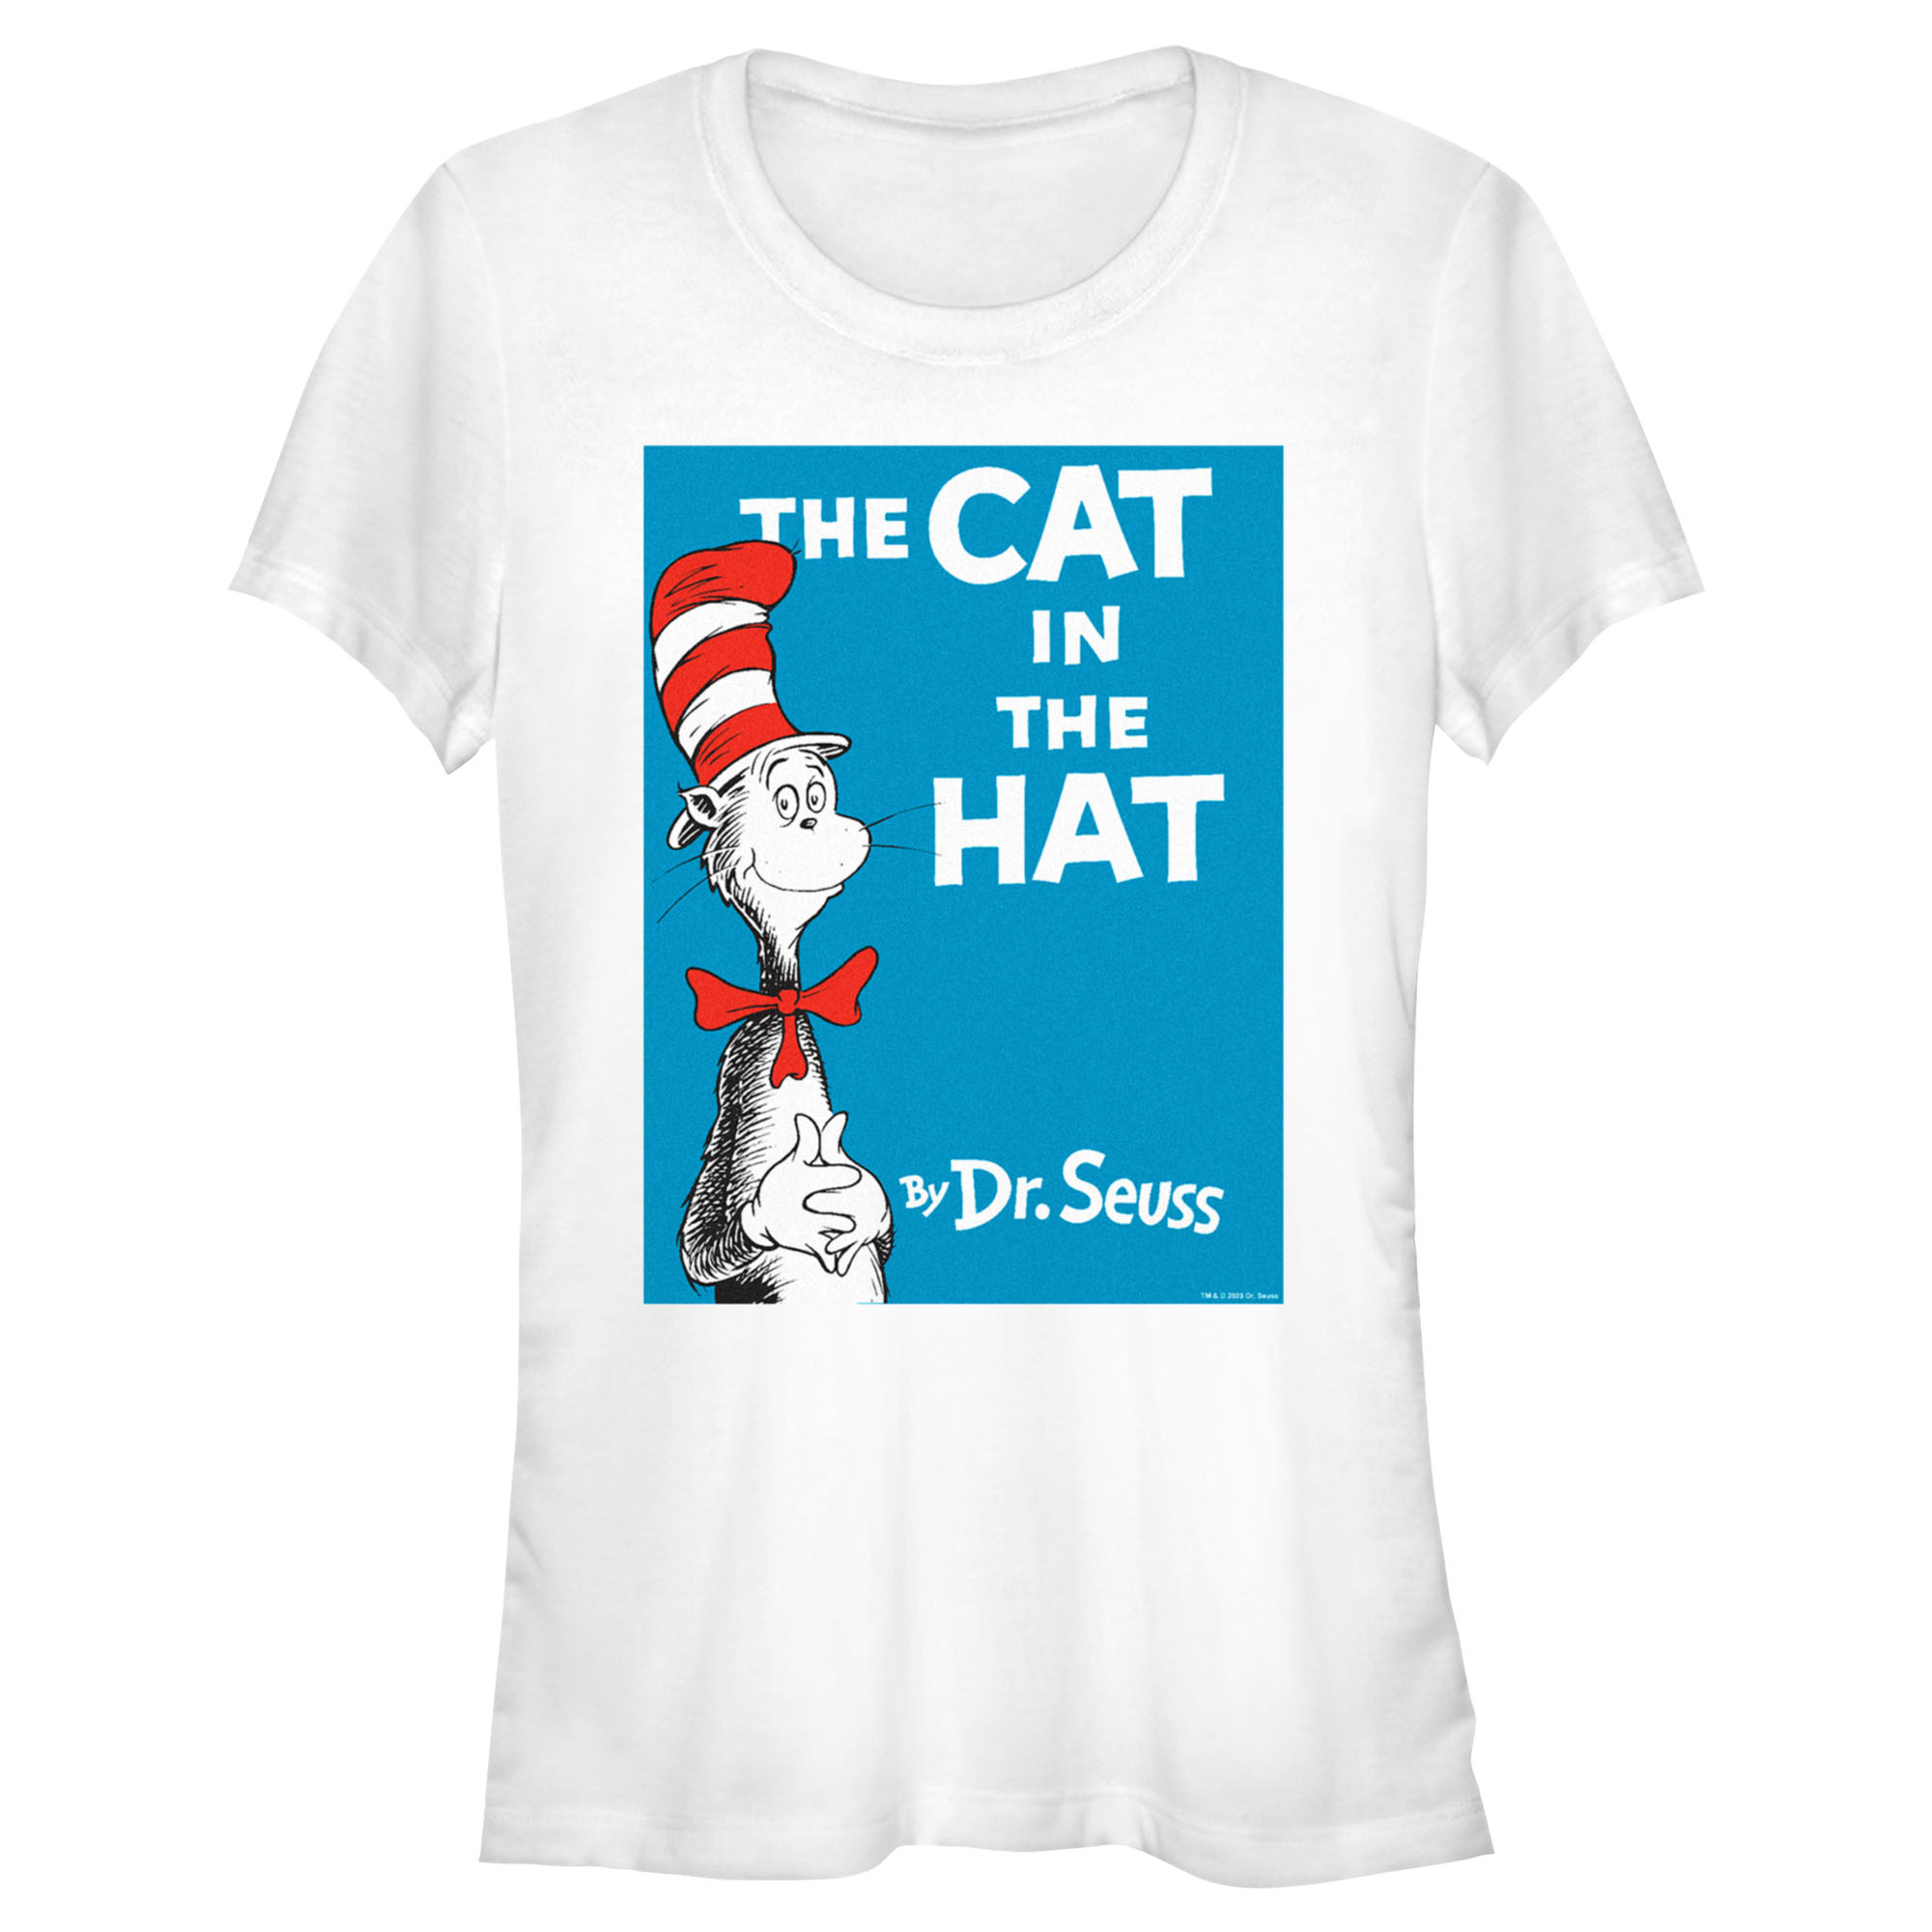 Dr. Seuss Junior's Dr. Seuss The Cat in the Hat Book Cover  Graphic T-Shirt